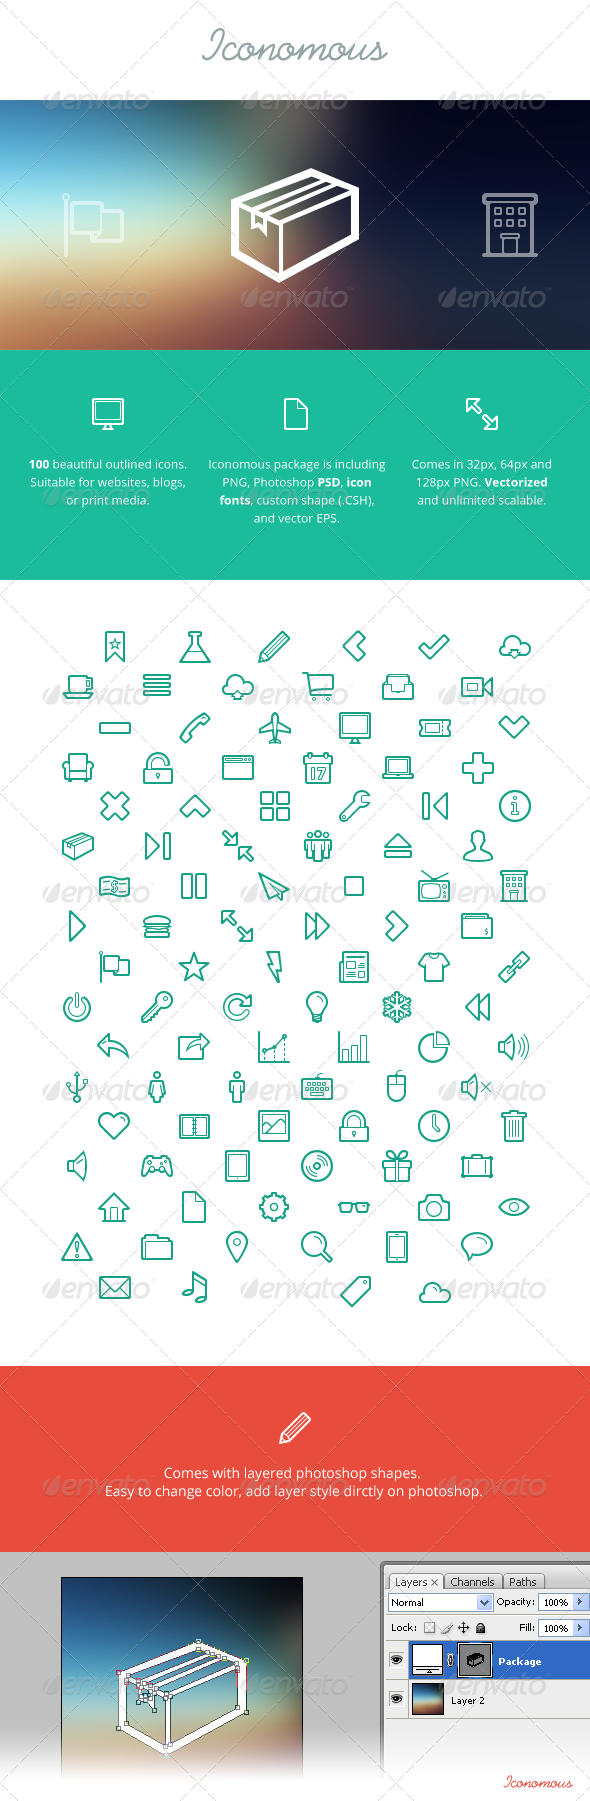 Iconomous - 100 Outlined Icons